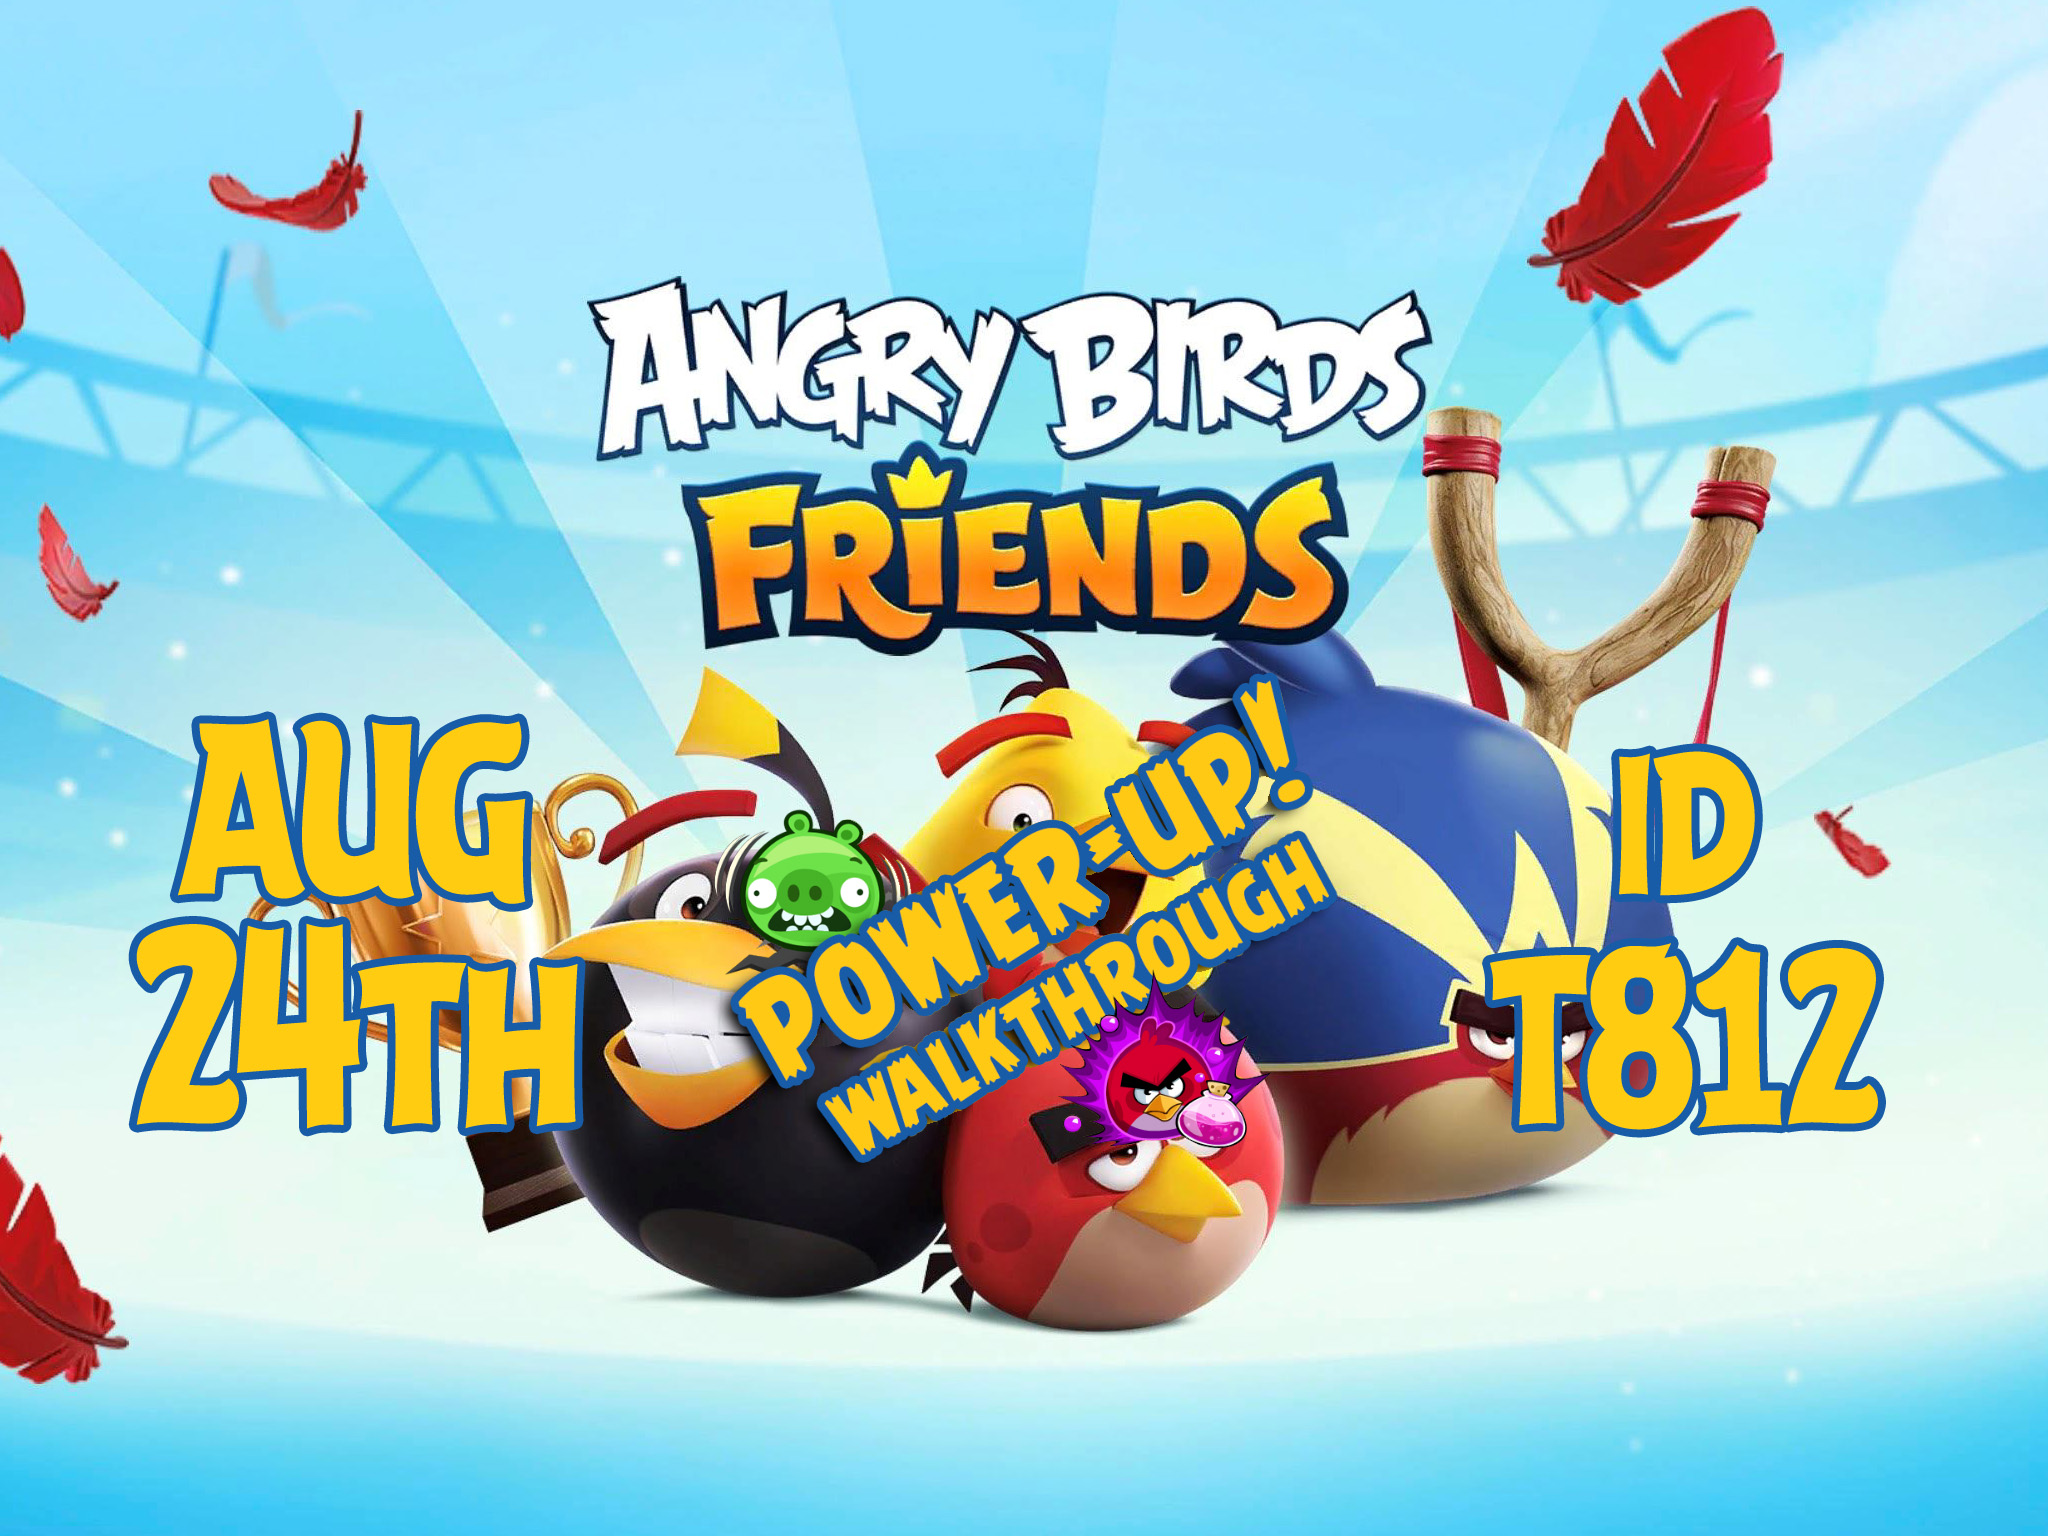 Angry-Birds-Friends-Tournament-T812a-Feature-Image-PU